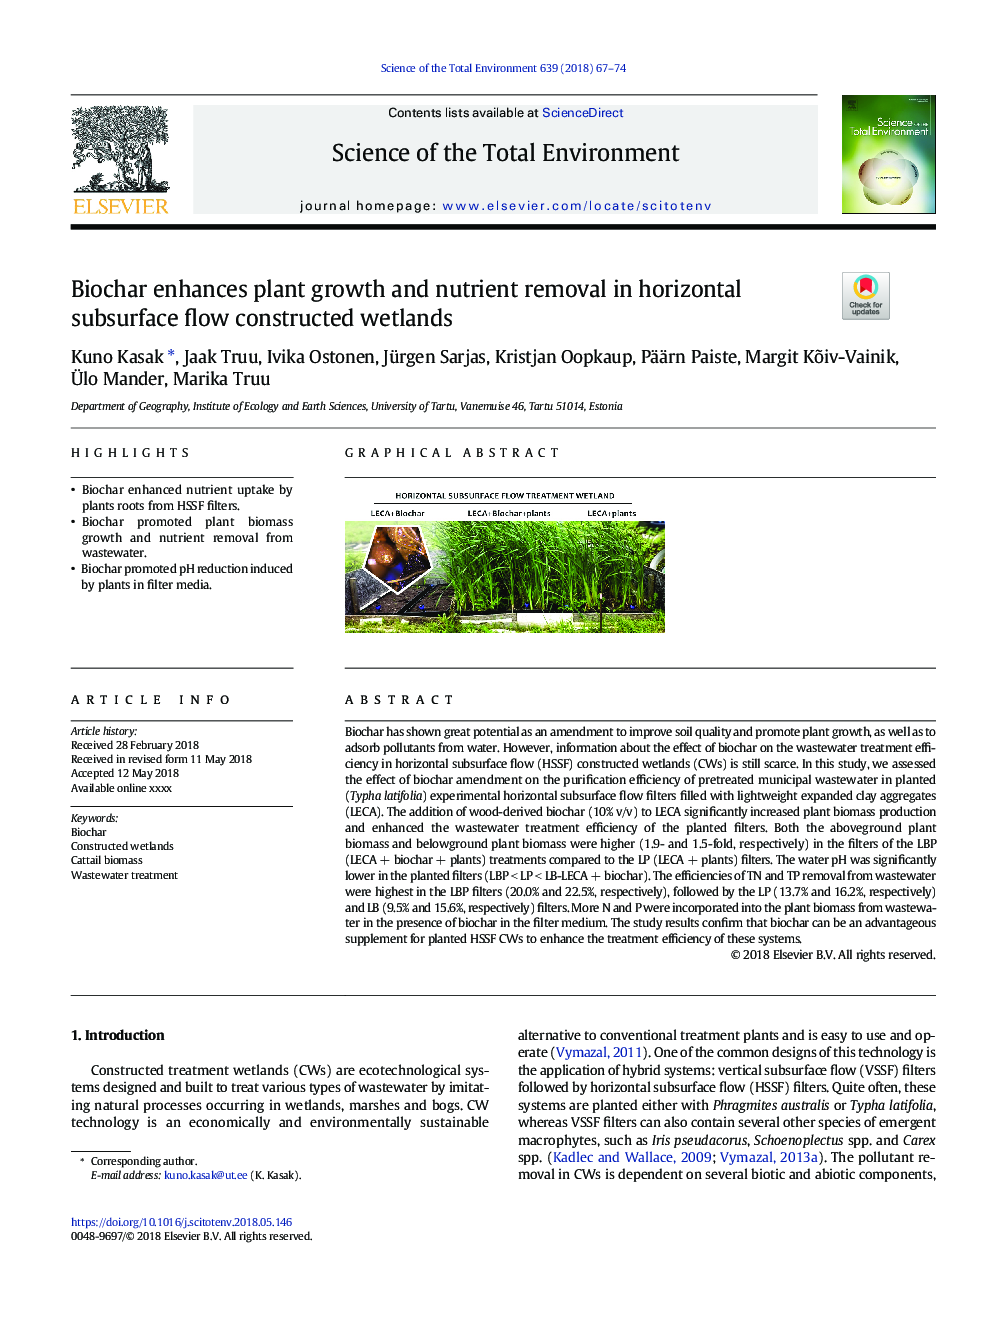 Biochar enhances plant growth and nutrient removal in horizontal subsurface flow constructed wetlands